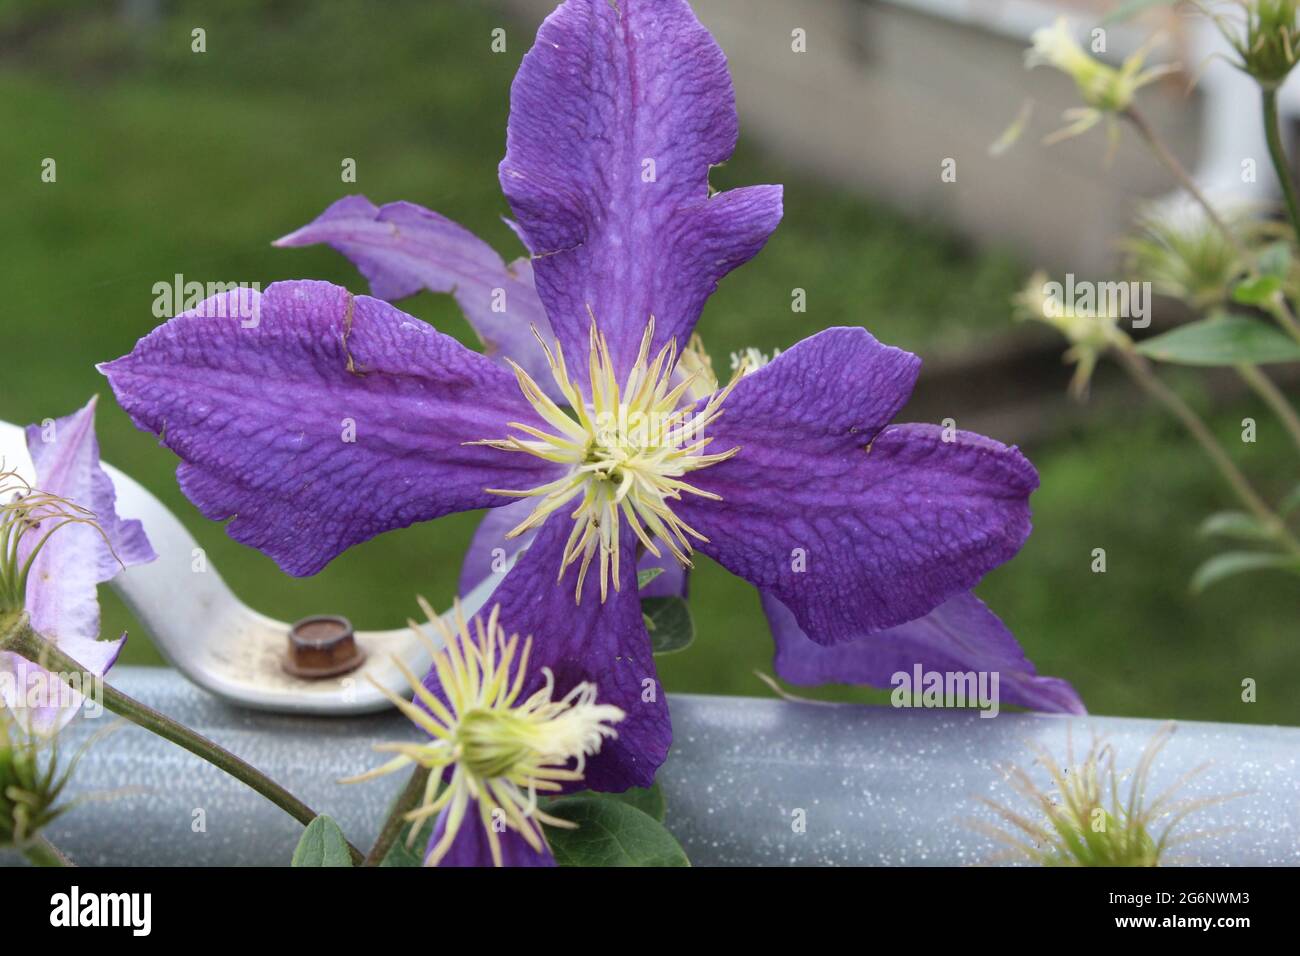 Clematis Flower Stock Photo